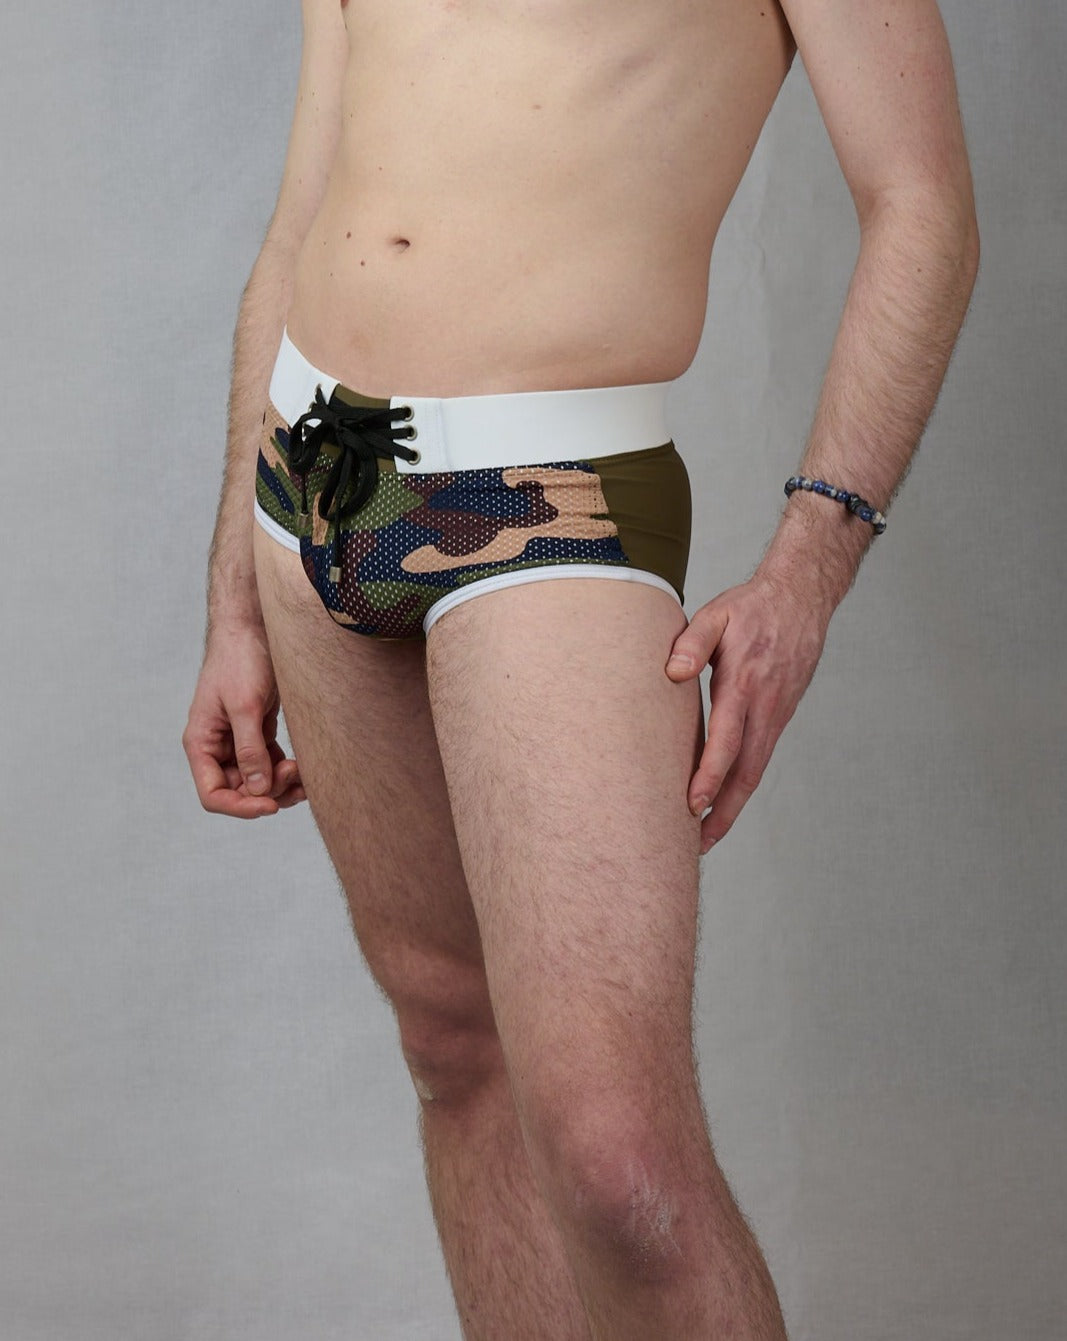 Cammo-colored swimming trunks or swim trunks with a push-up effect